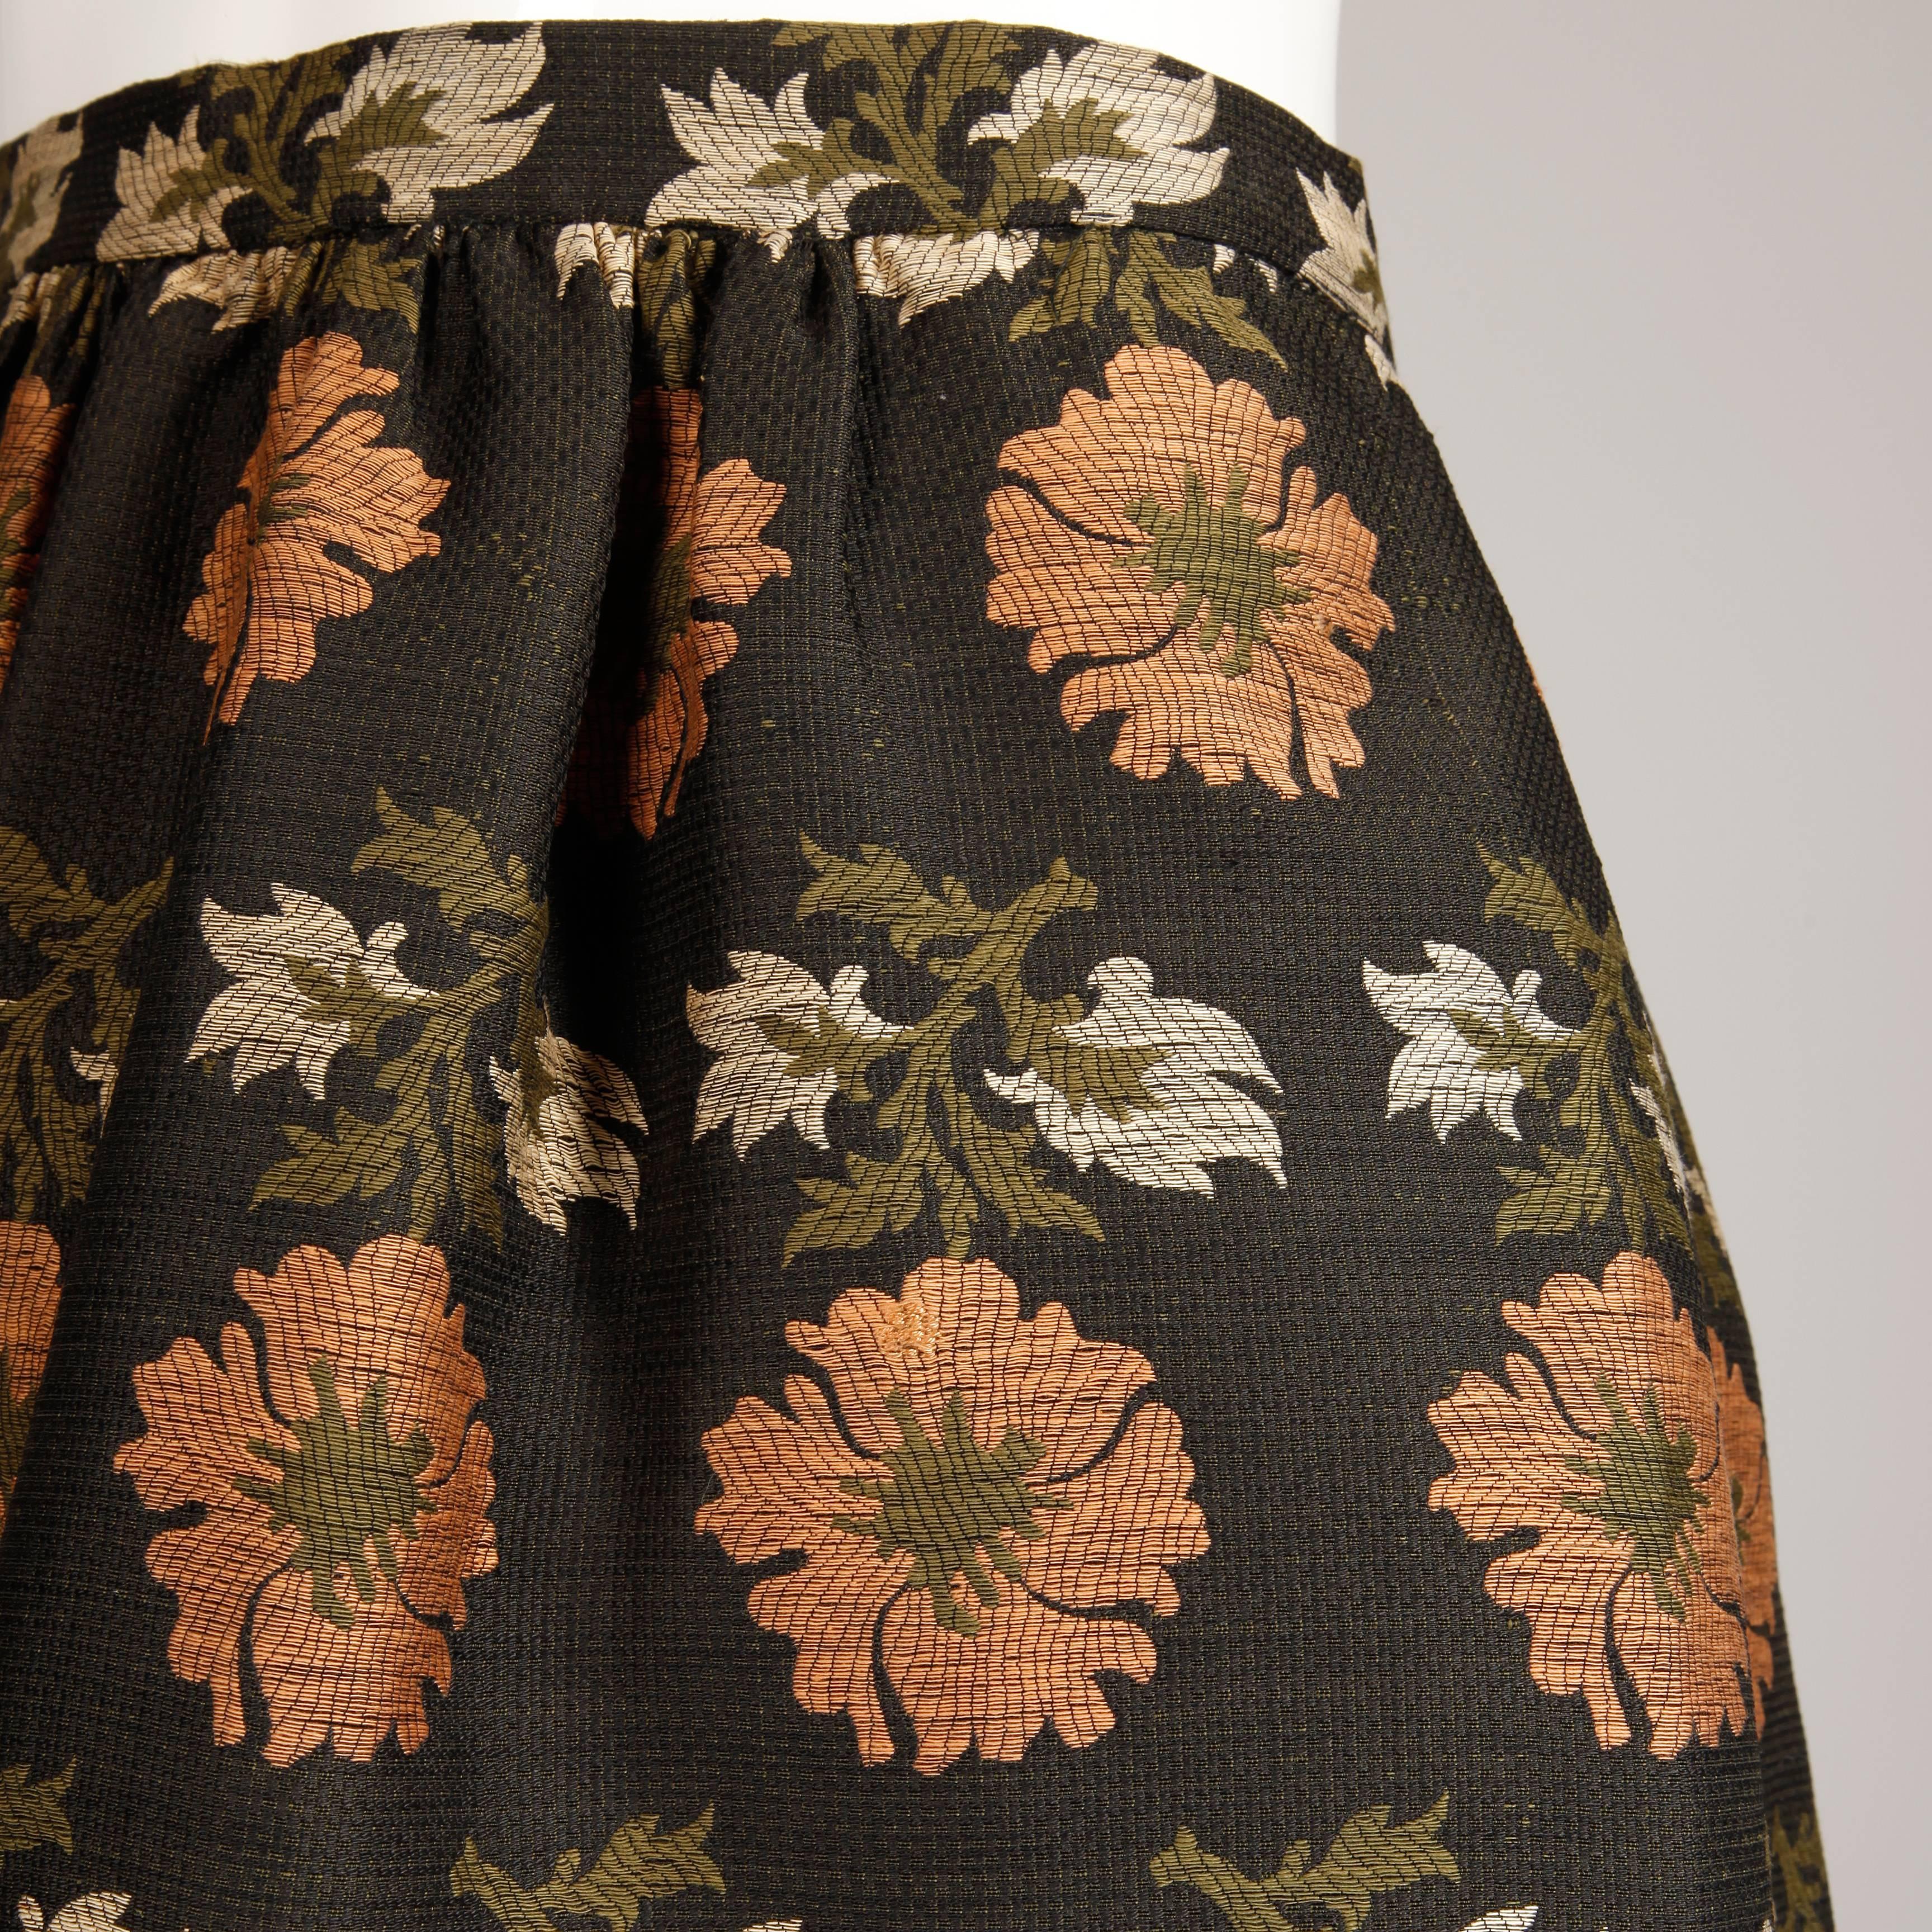 Black 1960s Vintage Silk Jacquard Woven Floral Tapestry Skirt in Brown, Coral + Green